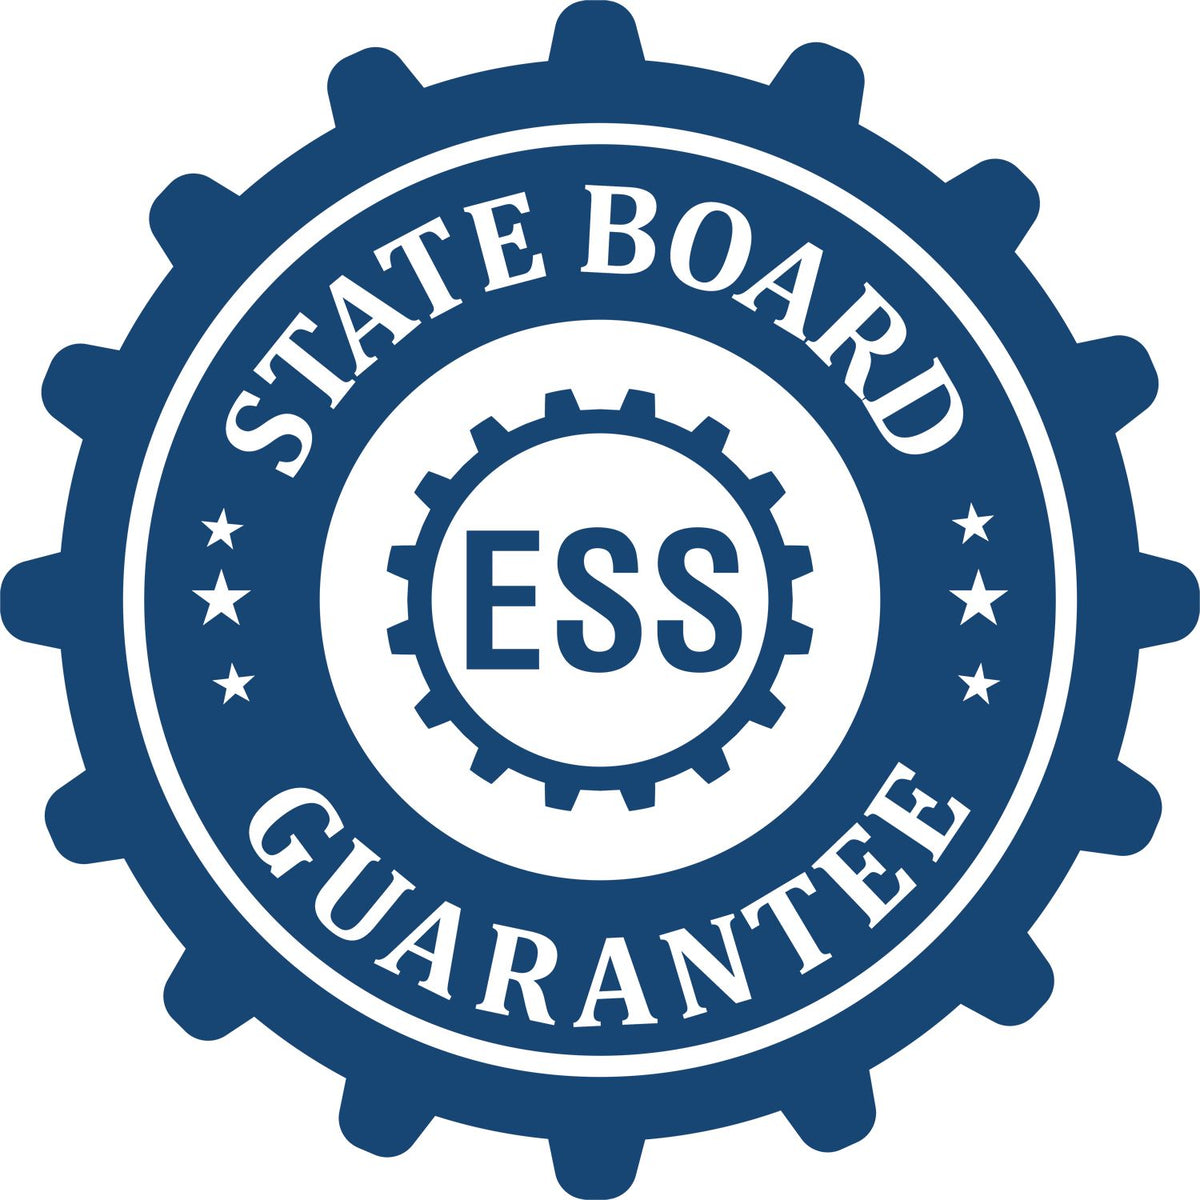 An emblem in a gear shape illustrating a state board guarantee for the Florida Professional Engineer Seal Stamp product.